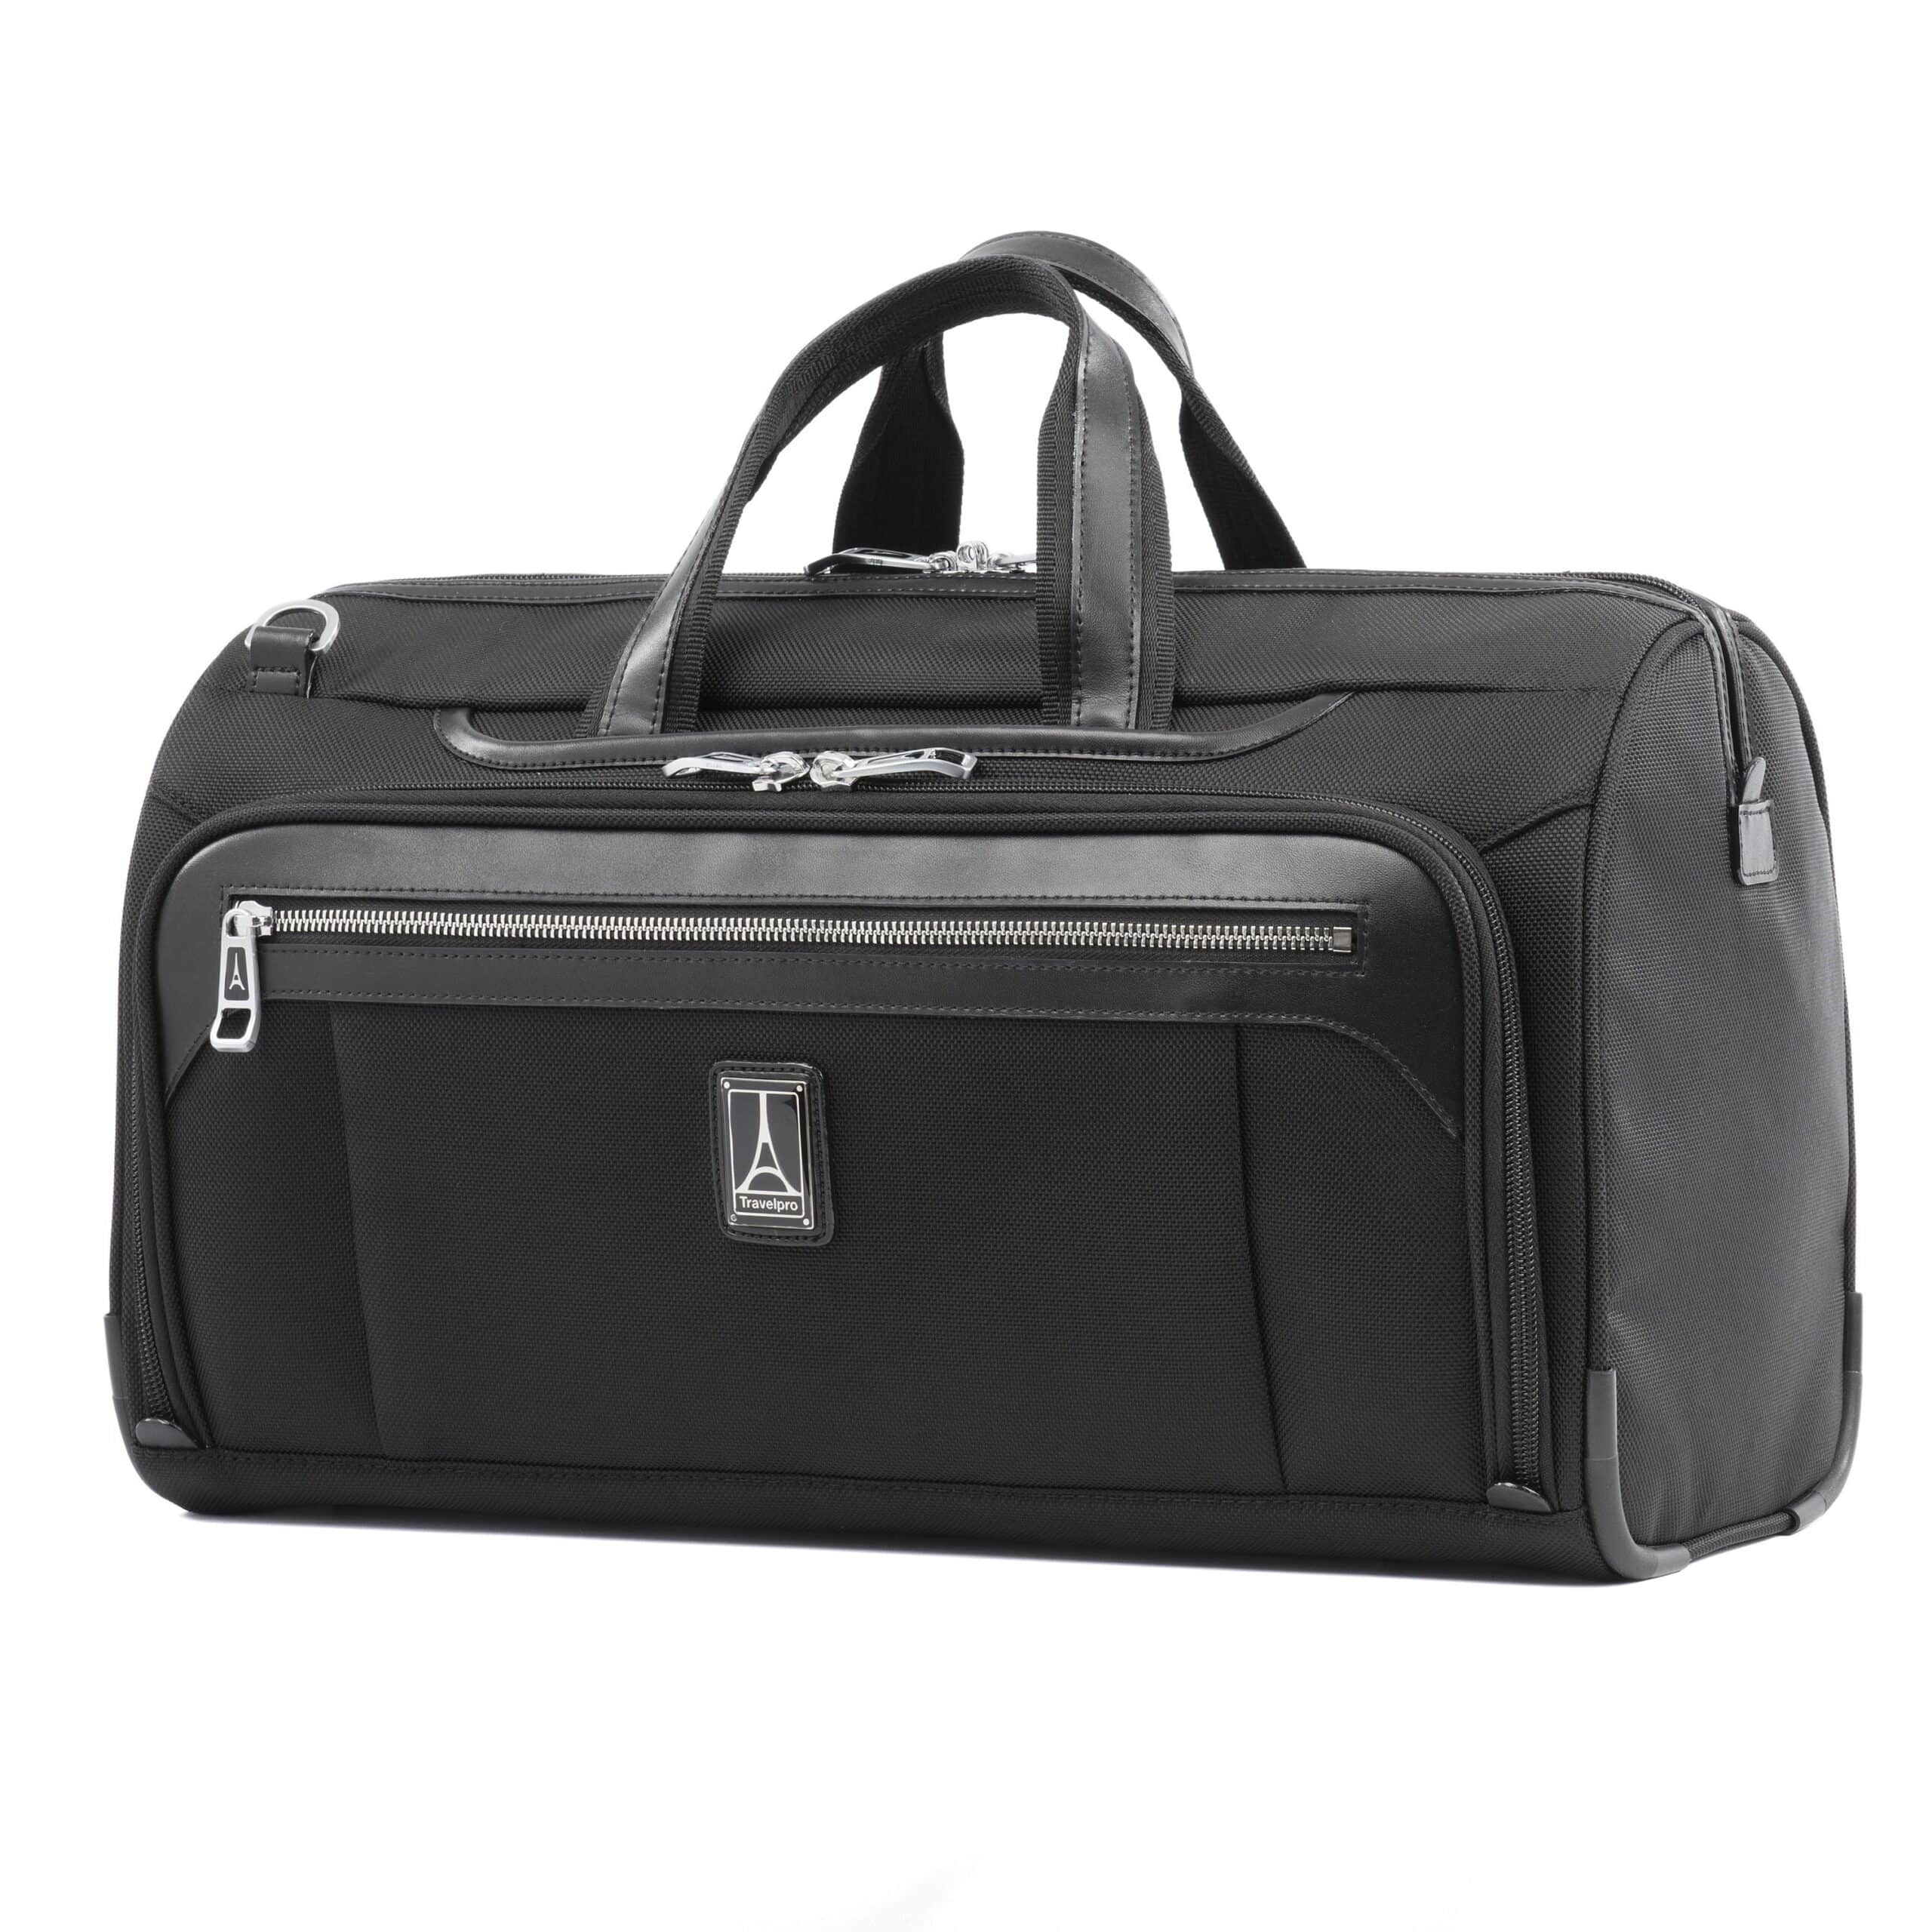 Travelpro Platinum Elite Duffel – A Quality Gym And Weekend Bag?